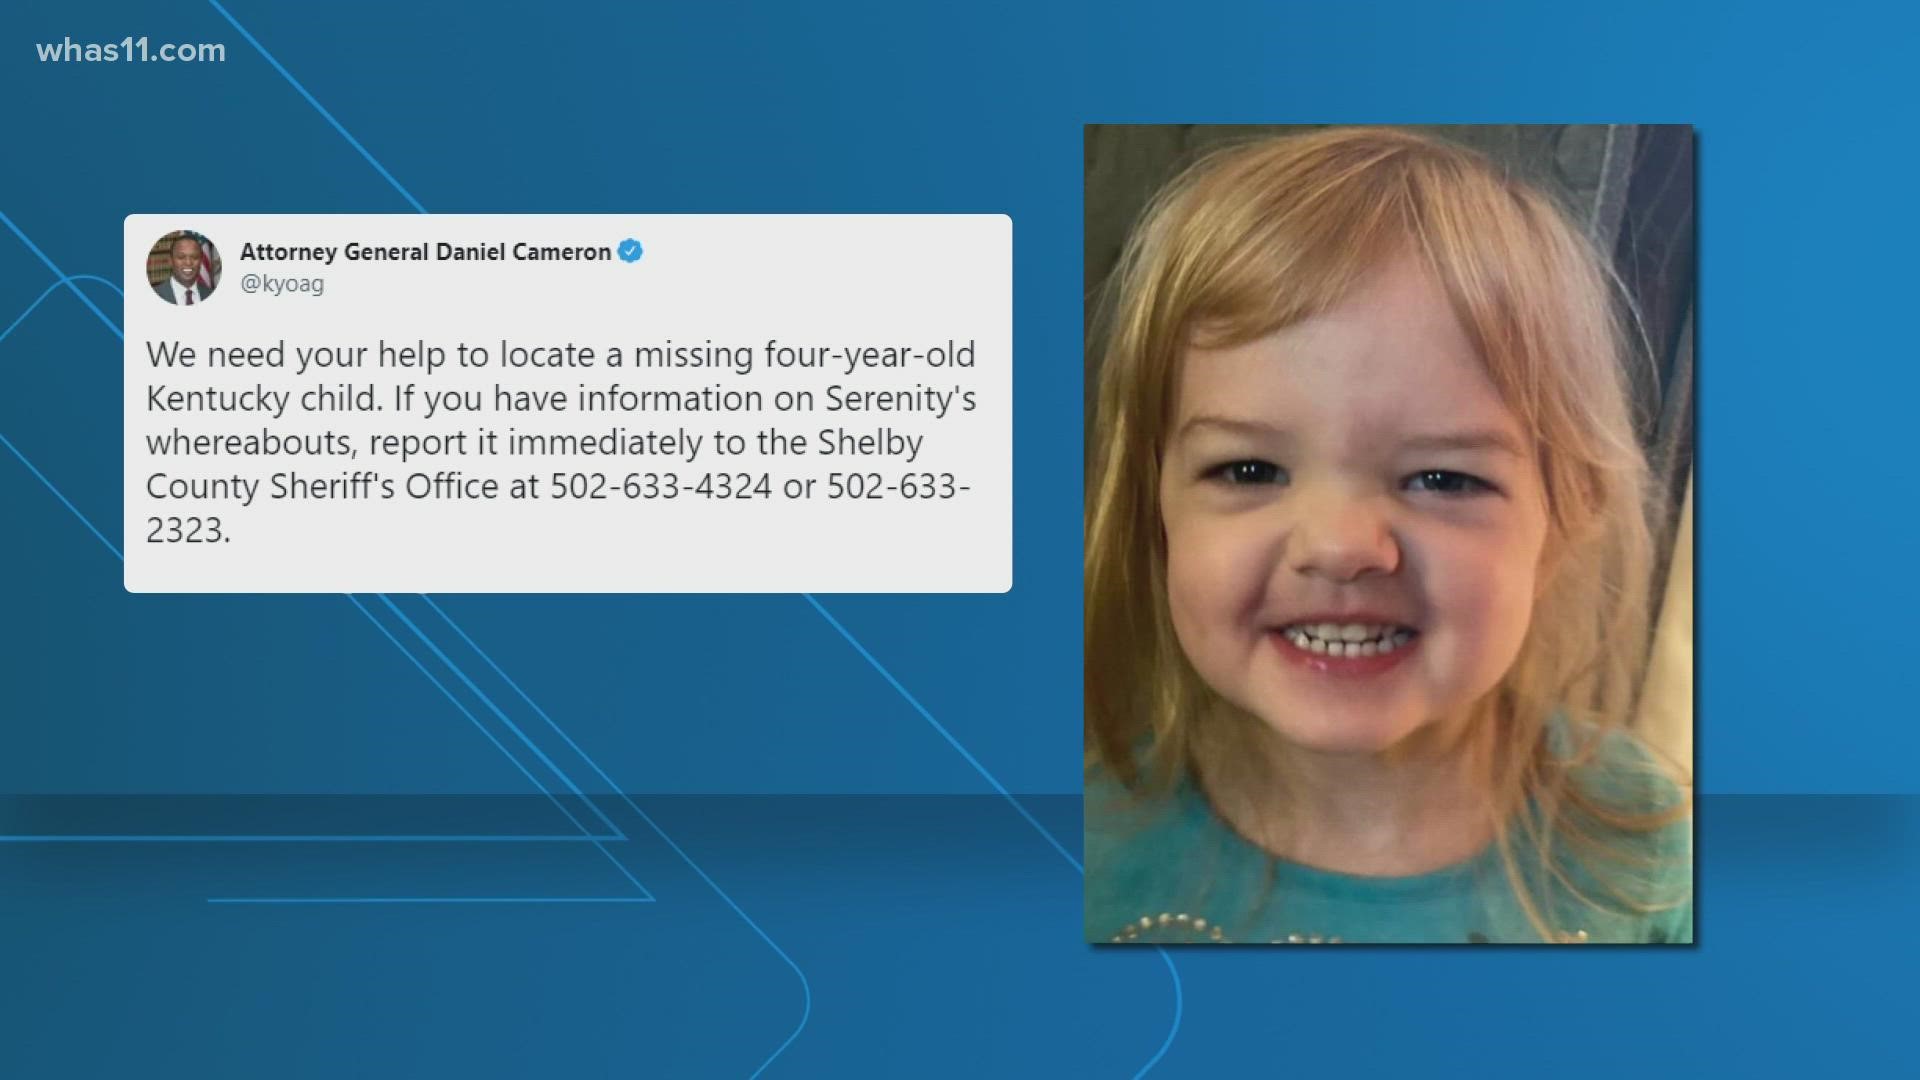 Family members said they have not seen Serenity Ann McKinney since Dec. 24, 2020. Police say her parents refuse to cooperate.